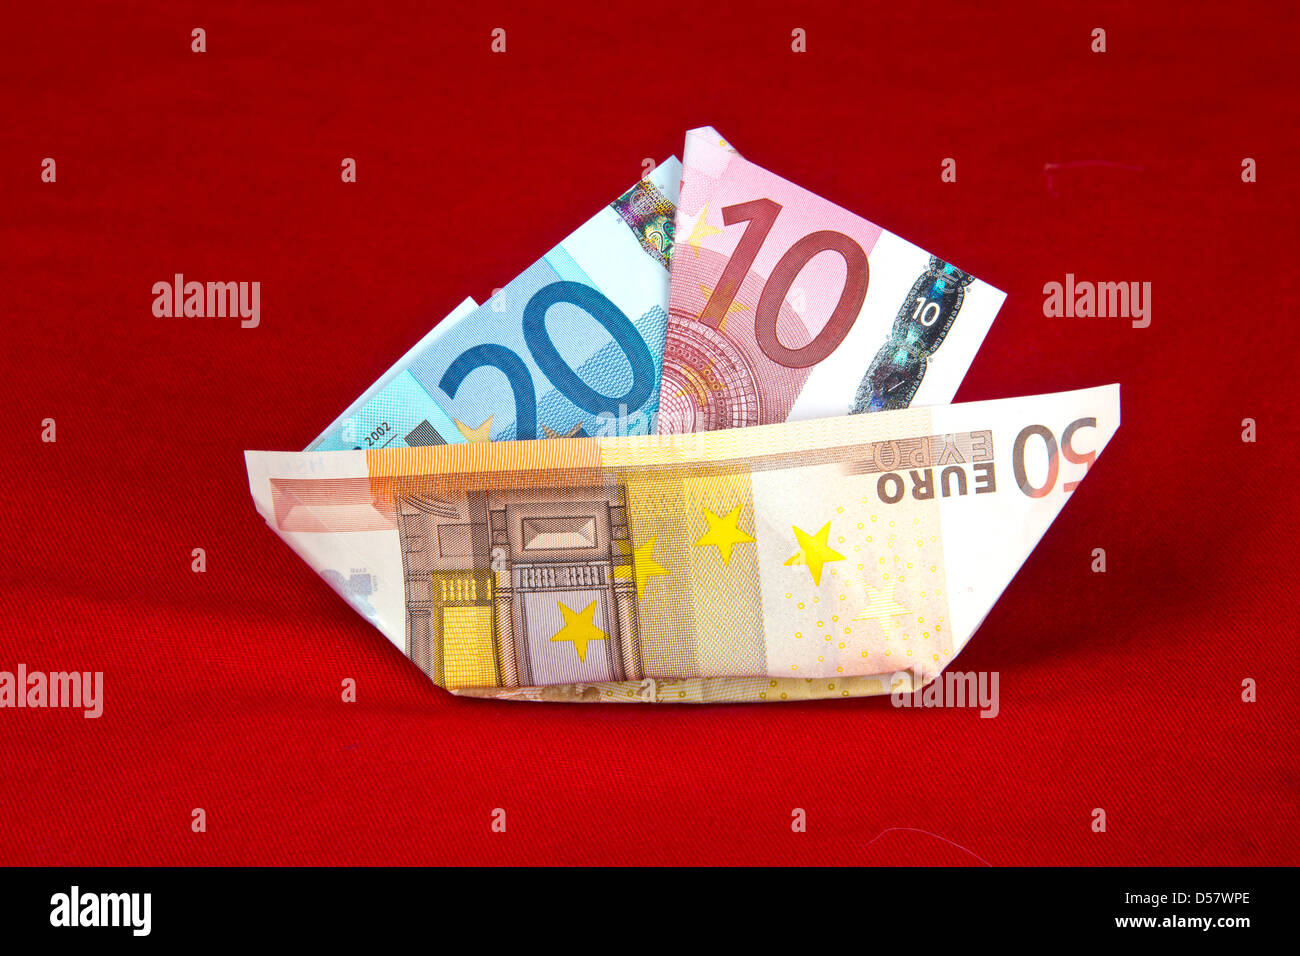 Euros bank notes. paper boat Money.Eurozone, European curency, Floating currency, paper money cash.  €5 €10 €20 €50 euros banknotes  135182 Euros Stock Photo